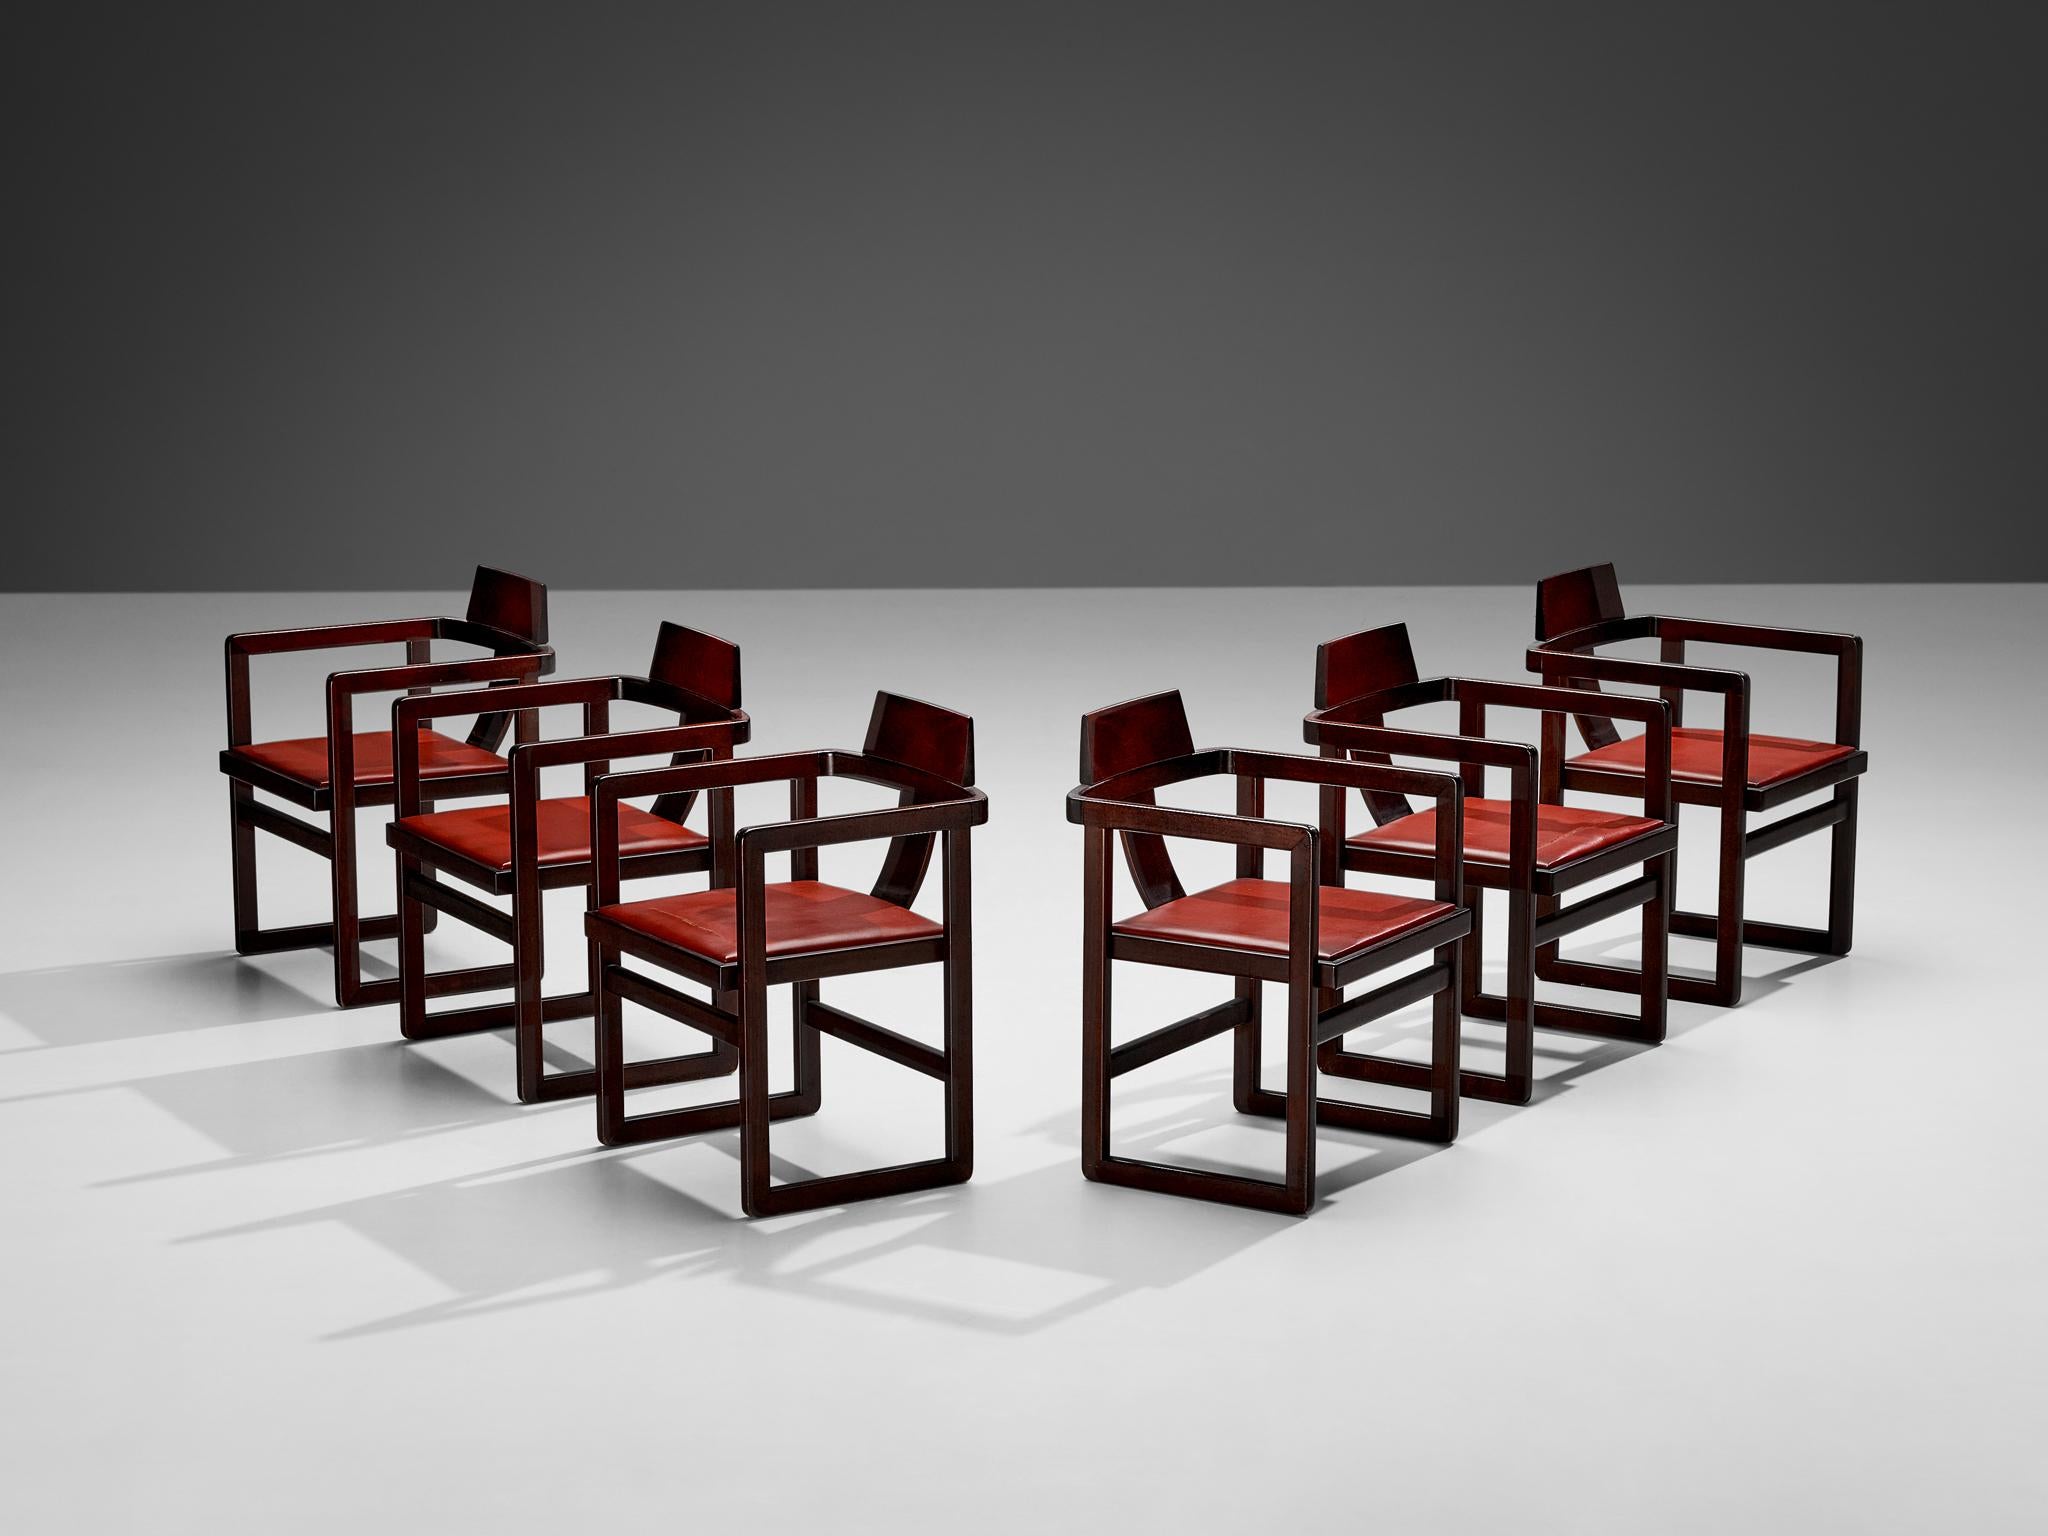 Set of six armchairs, stained beech, leatherette, Italy, 1970s

Simplistic yet elegant Italian set of six dining chairs. Straight geometric lines are prominent in the execution, for example to be seen in its dark stained wooden frame. An elegant